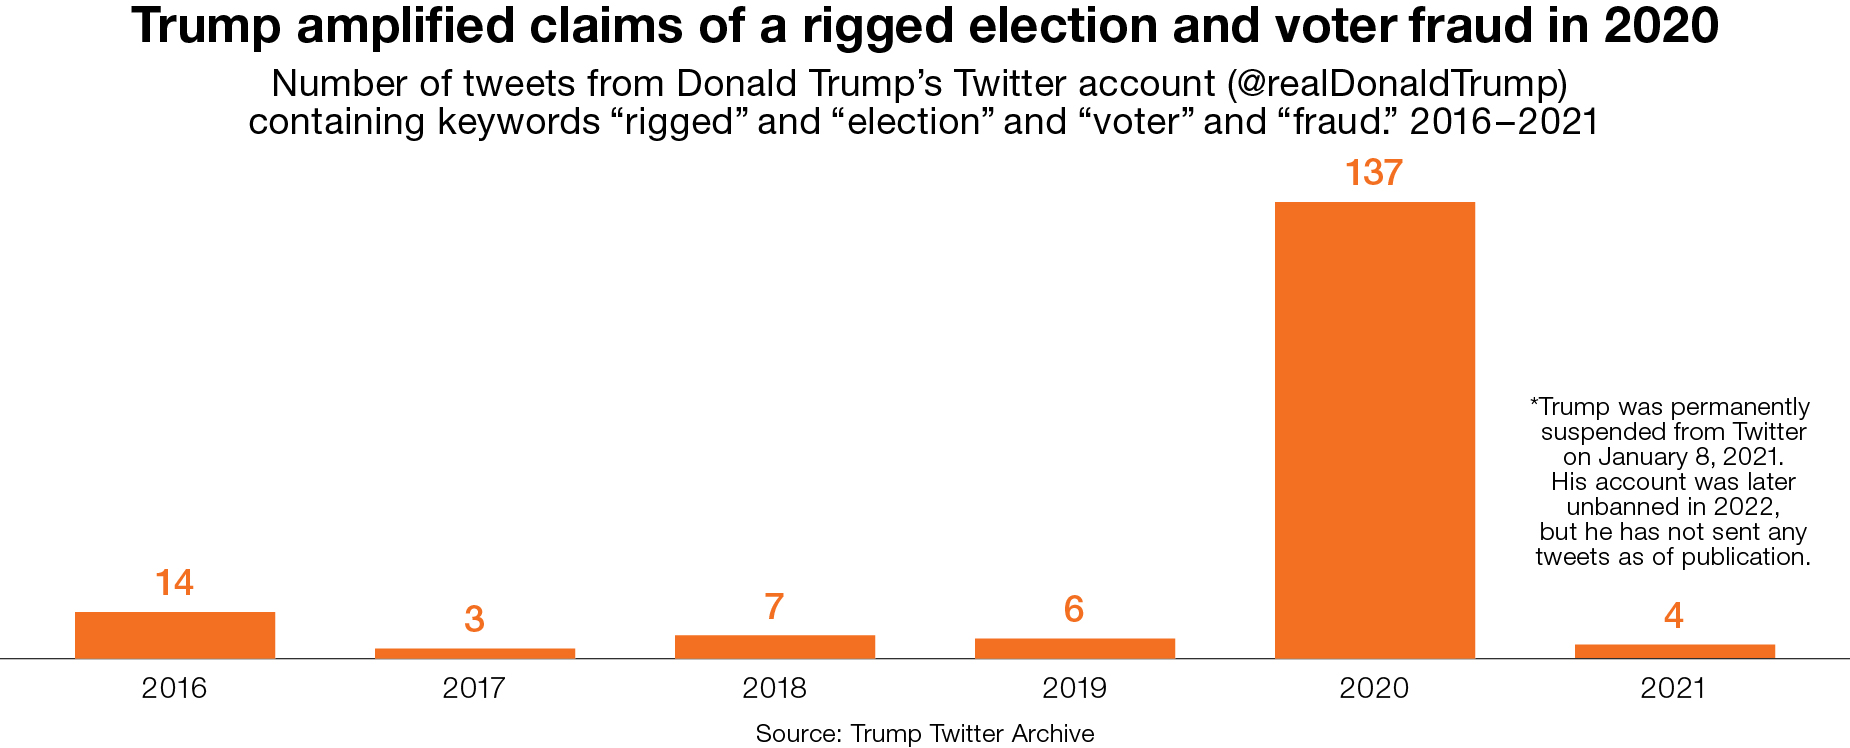 Donald Trump amplified claims of a rigged election and voter fraud in 2020